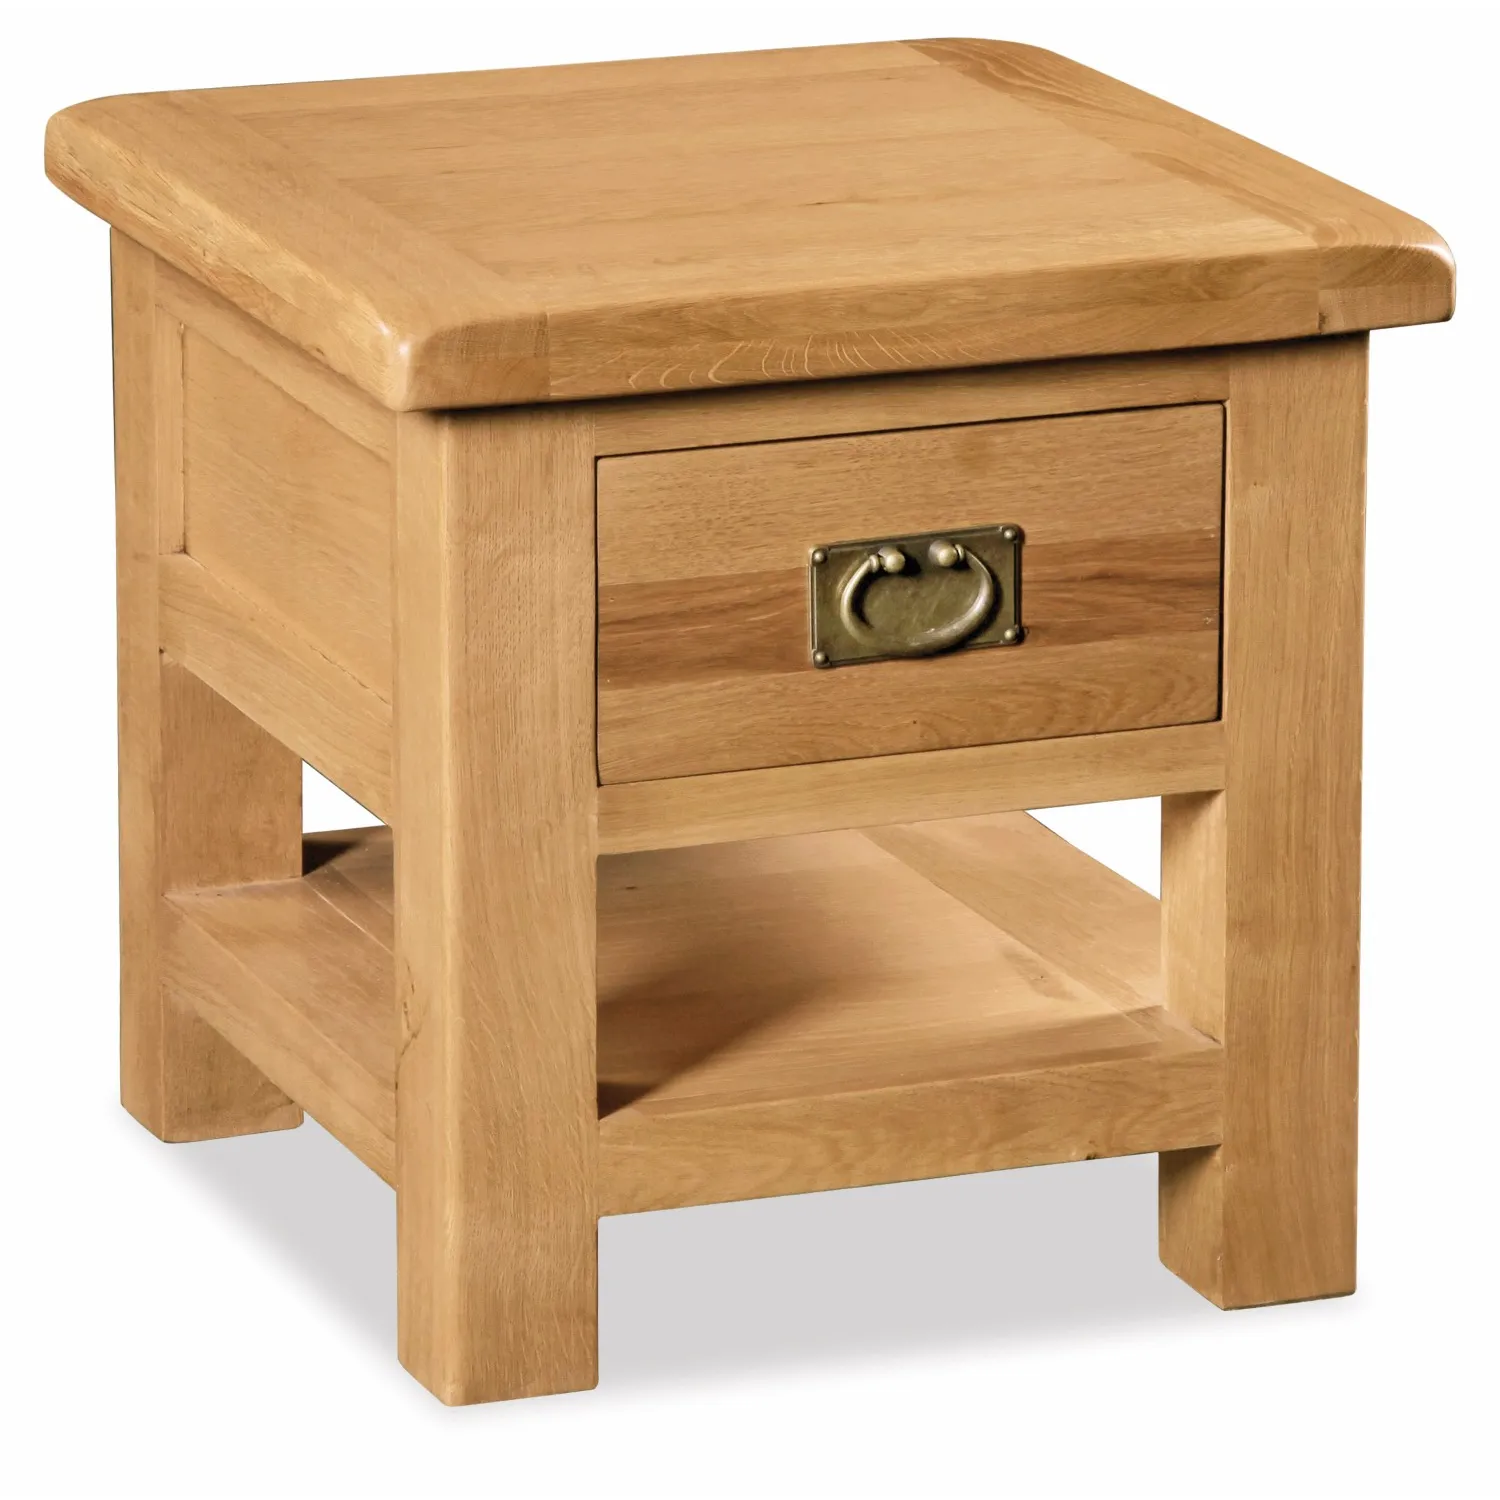 Rustic Solid Oak Lamp Table with Drawer